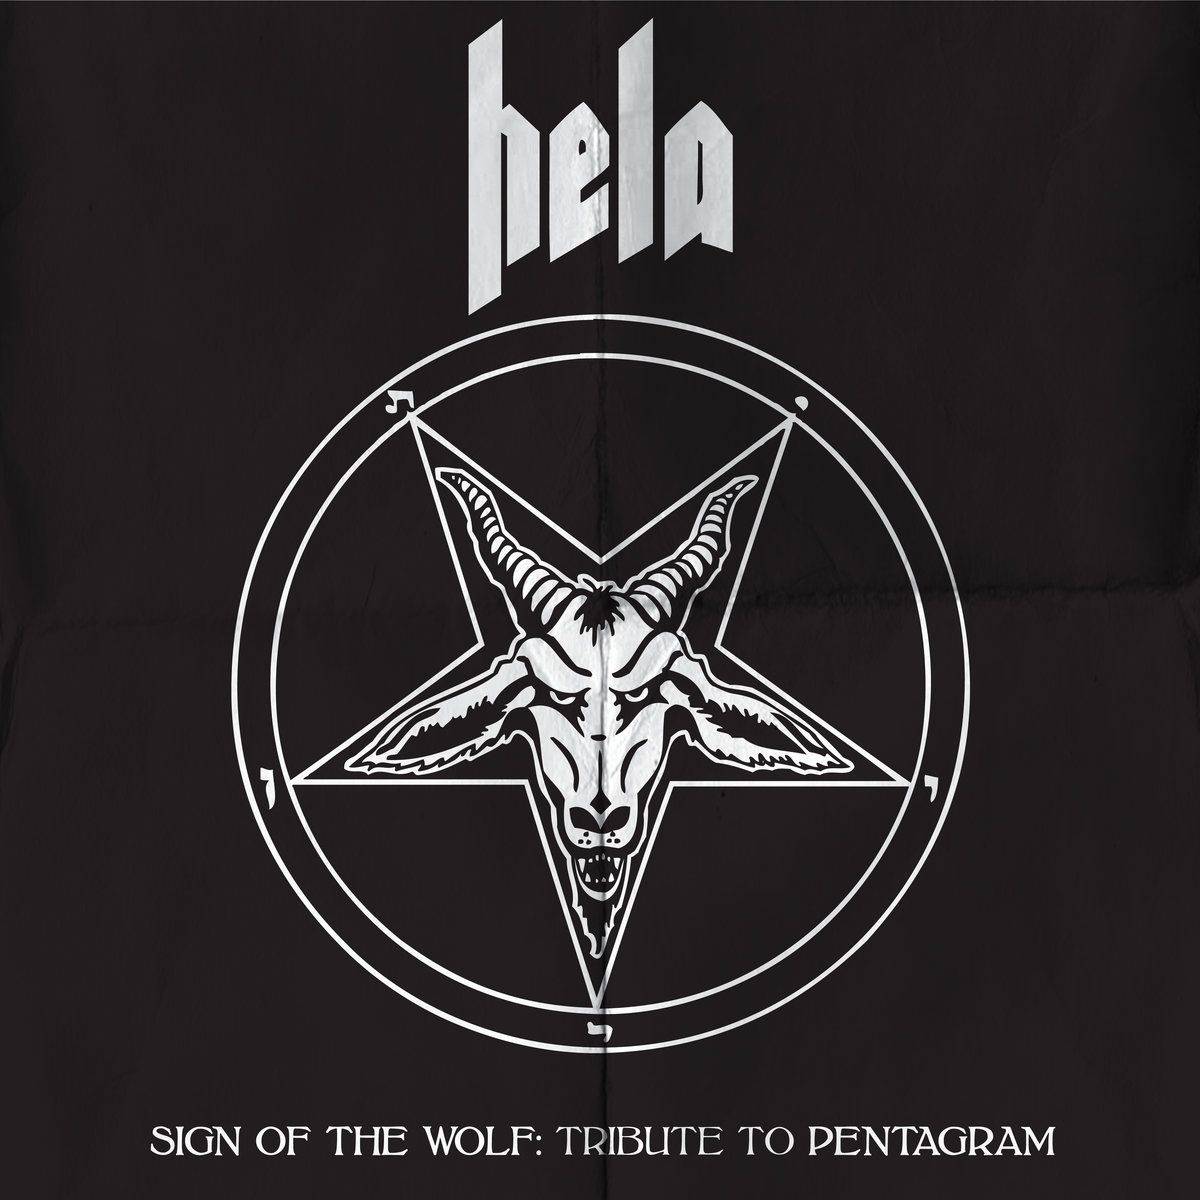 Sign Of The Wolf: Tribute To Pentagram